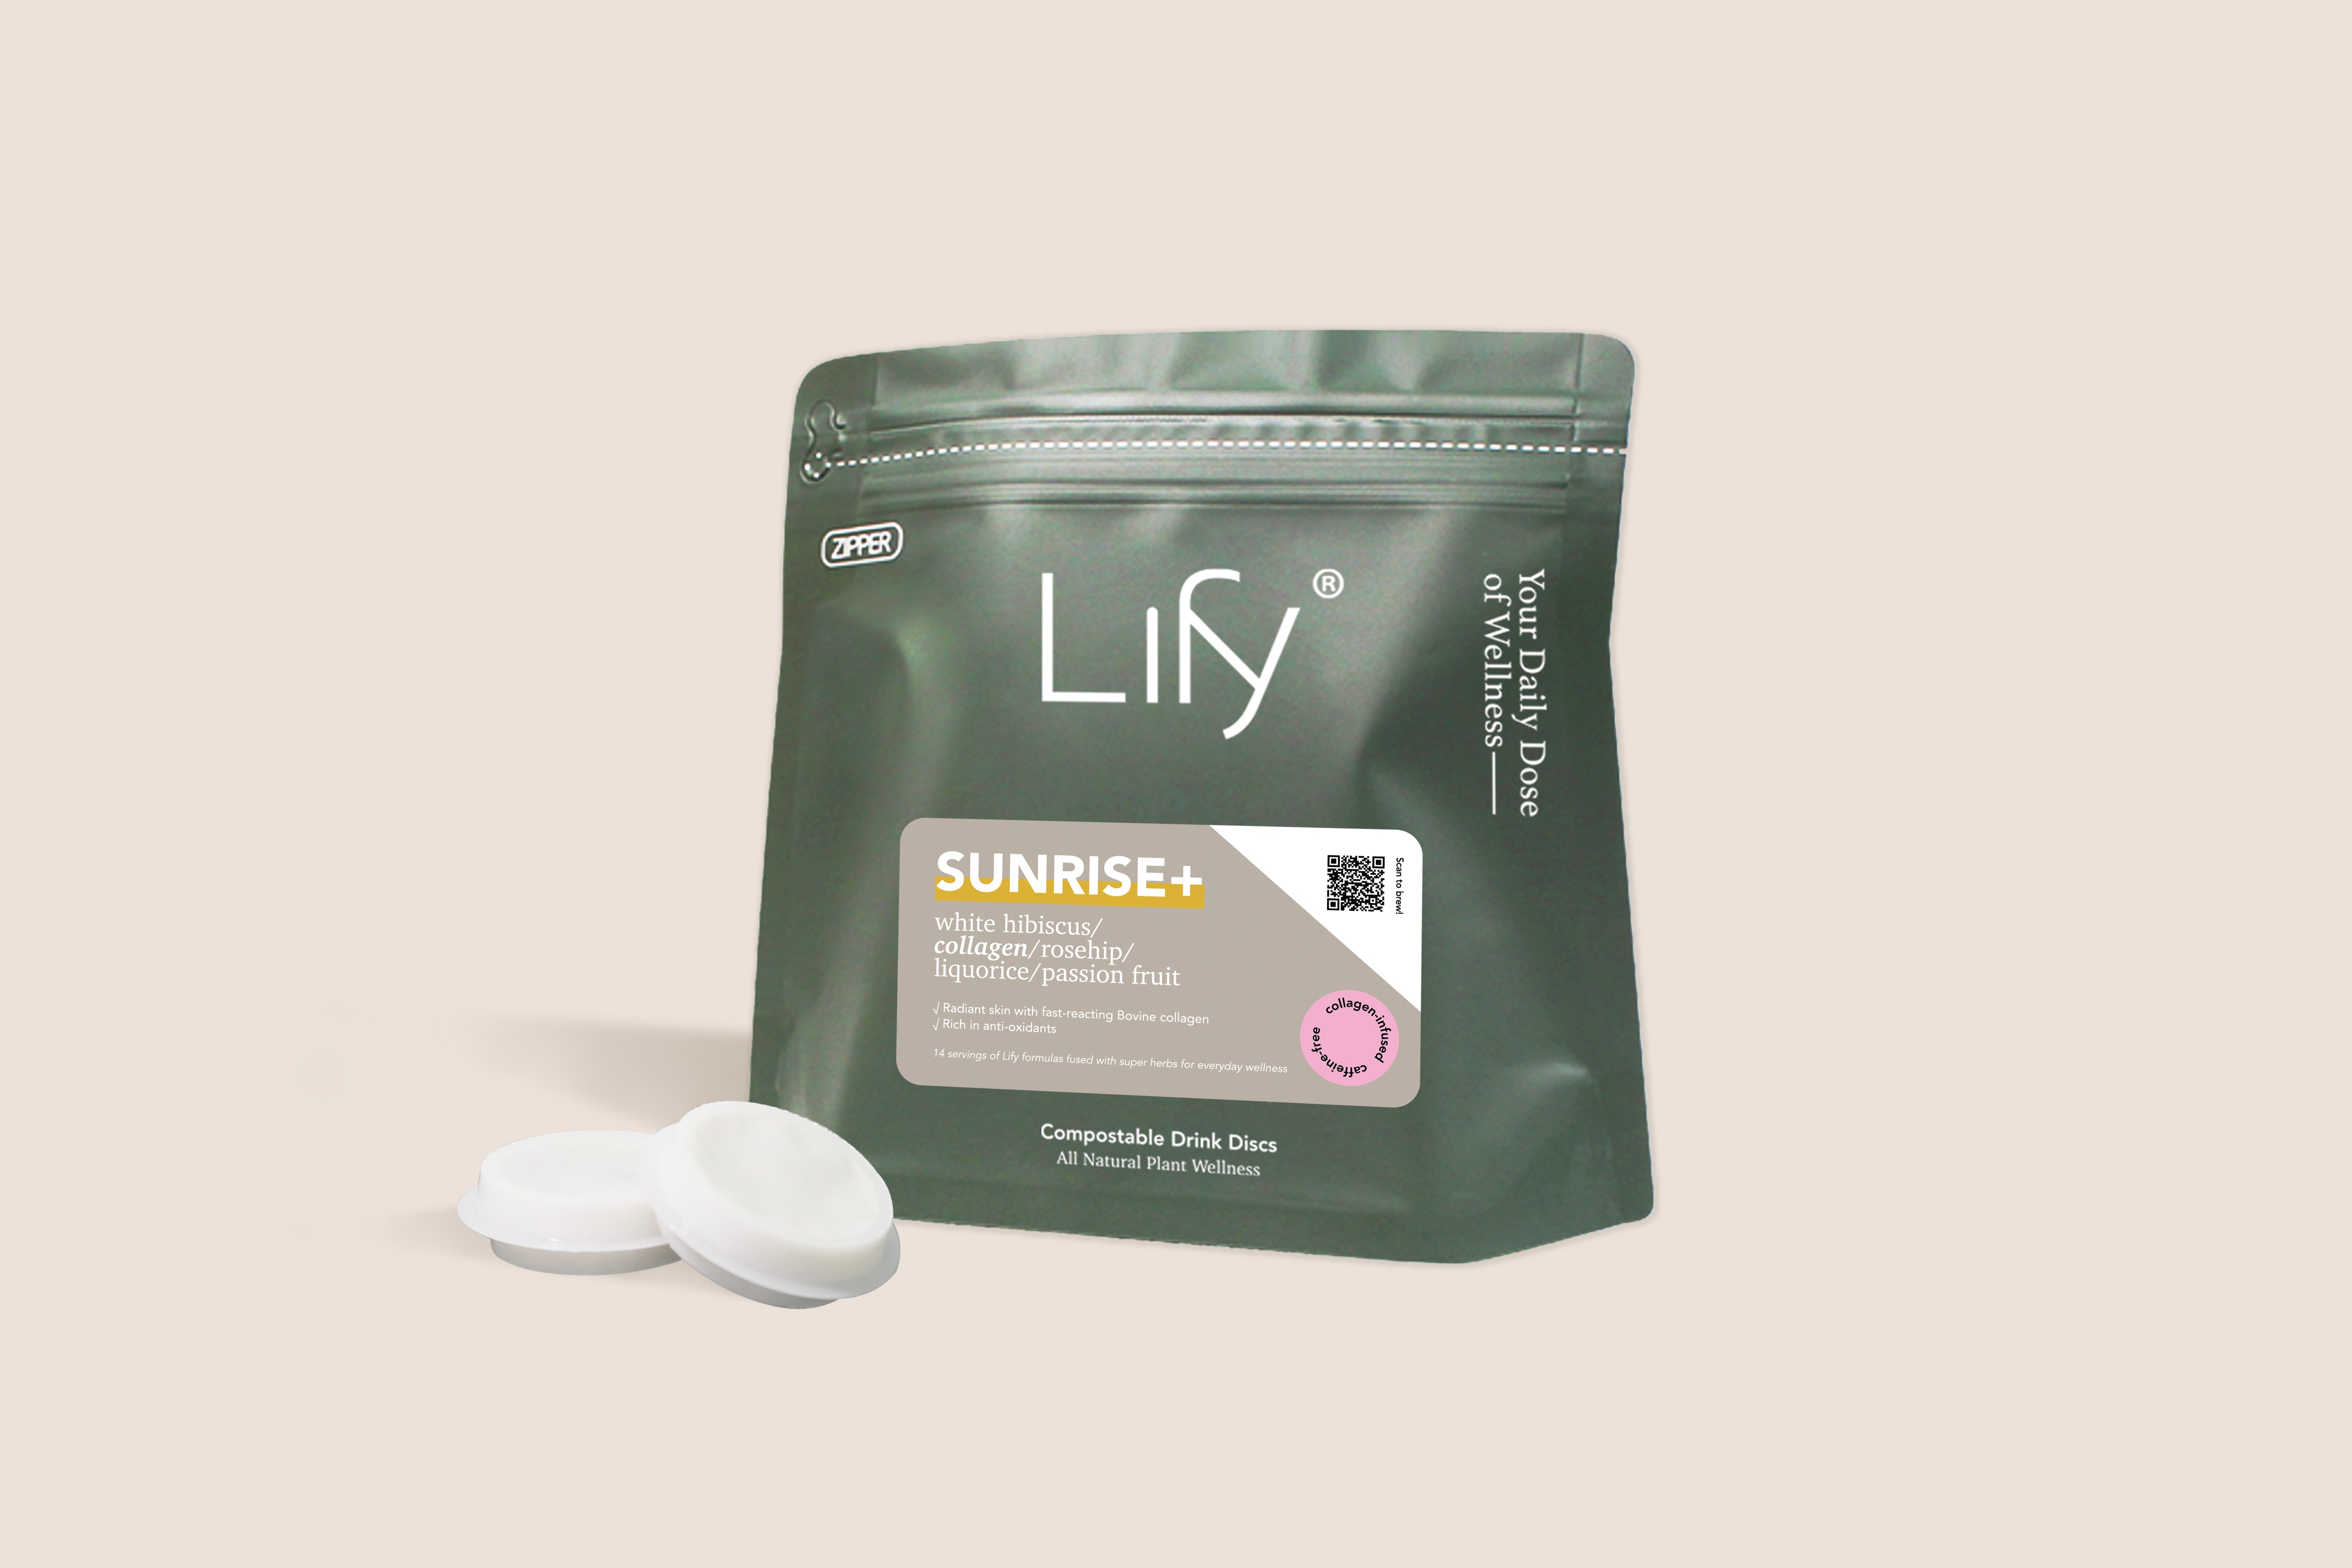 Sunrise+ with Collagen - Lify Wellness